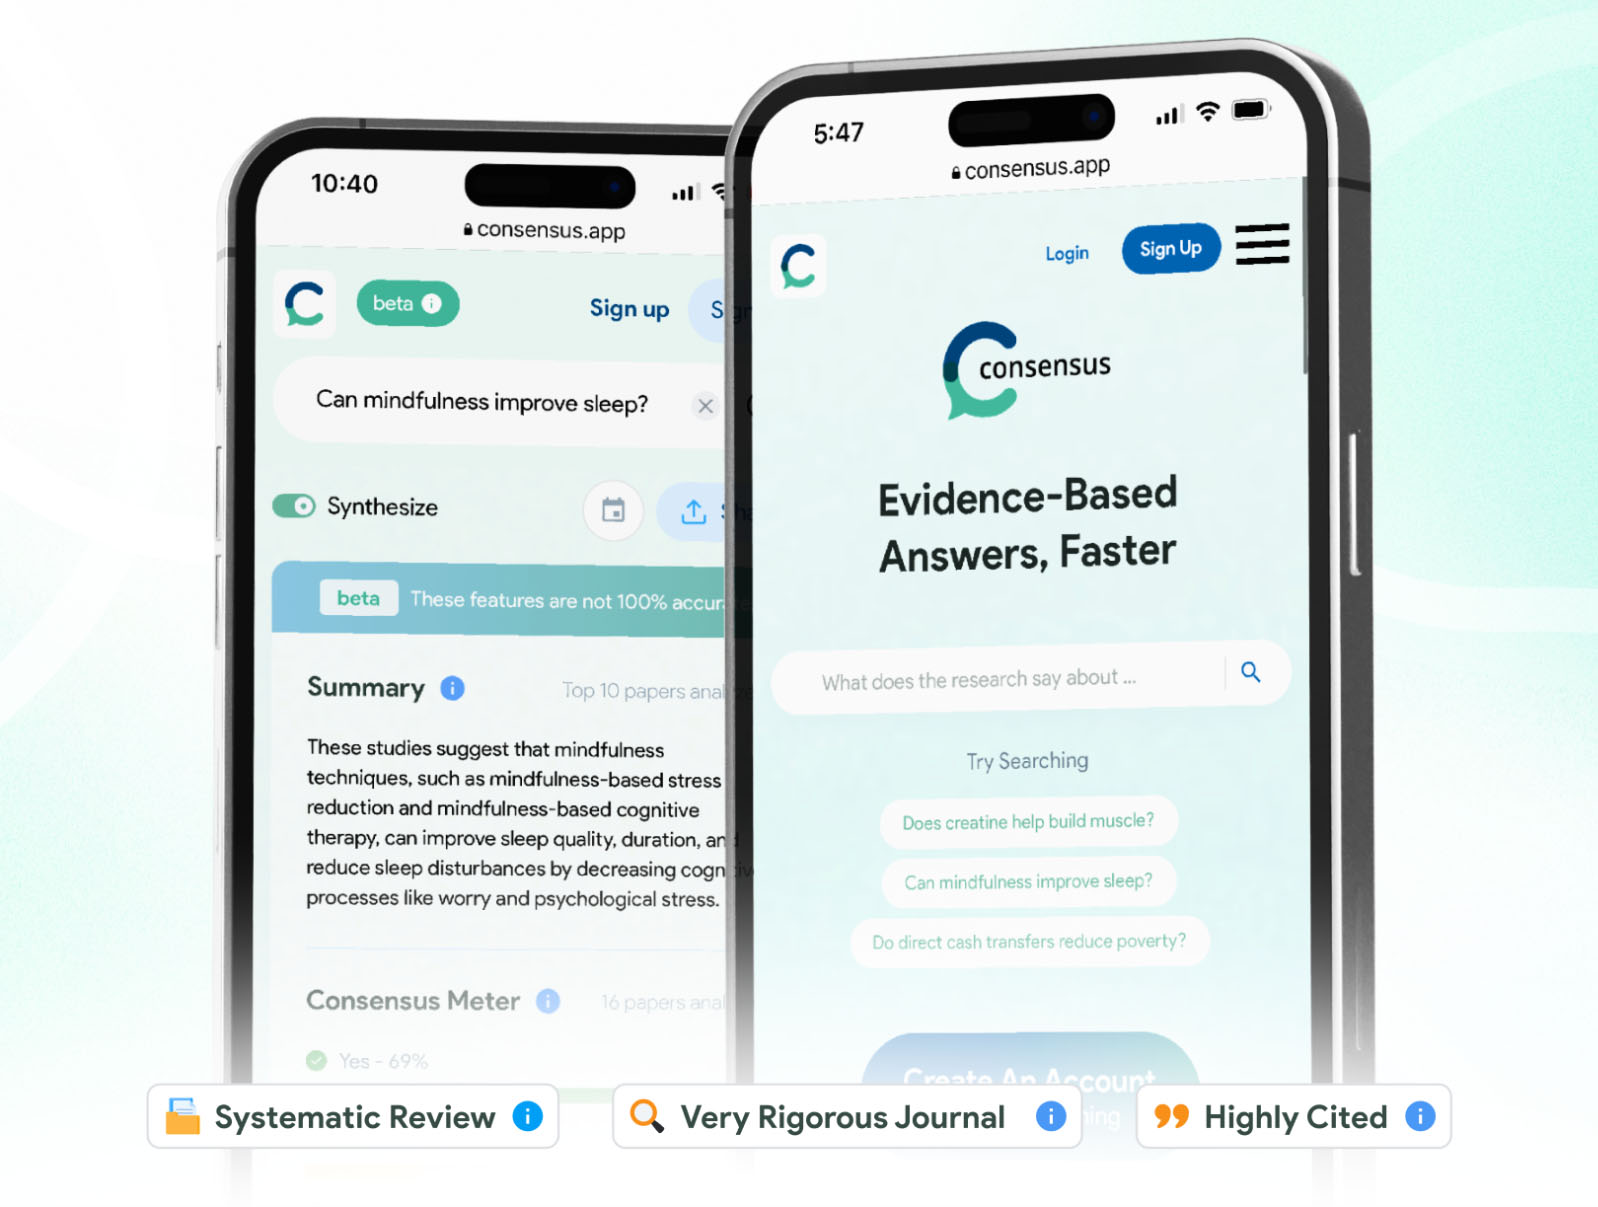 Consensus is a search engine that uses AI to find insights in research papers. Consensus 2.0 extracts question-relevant information from papers, based on the users query. This allows results to be more flexible and relevant to what the user is looking for.